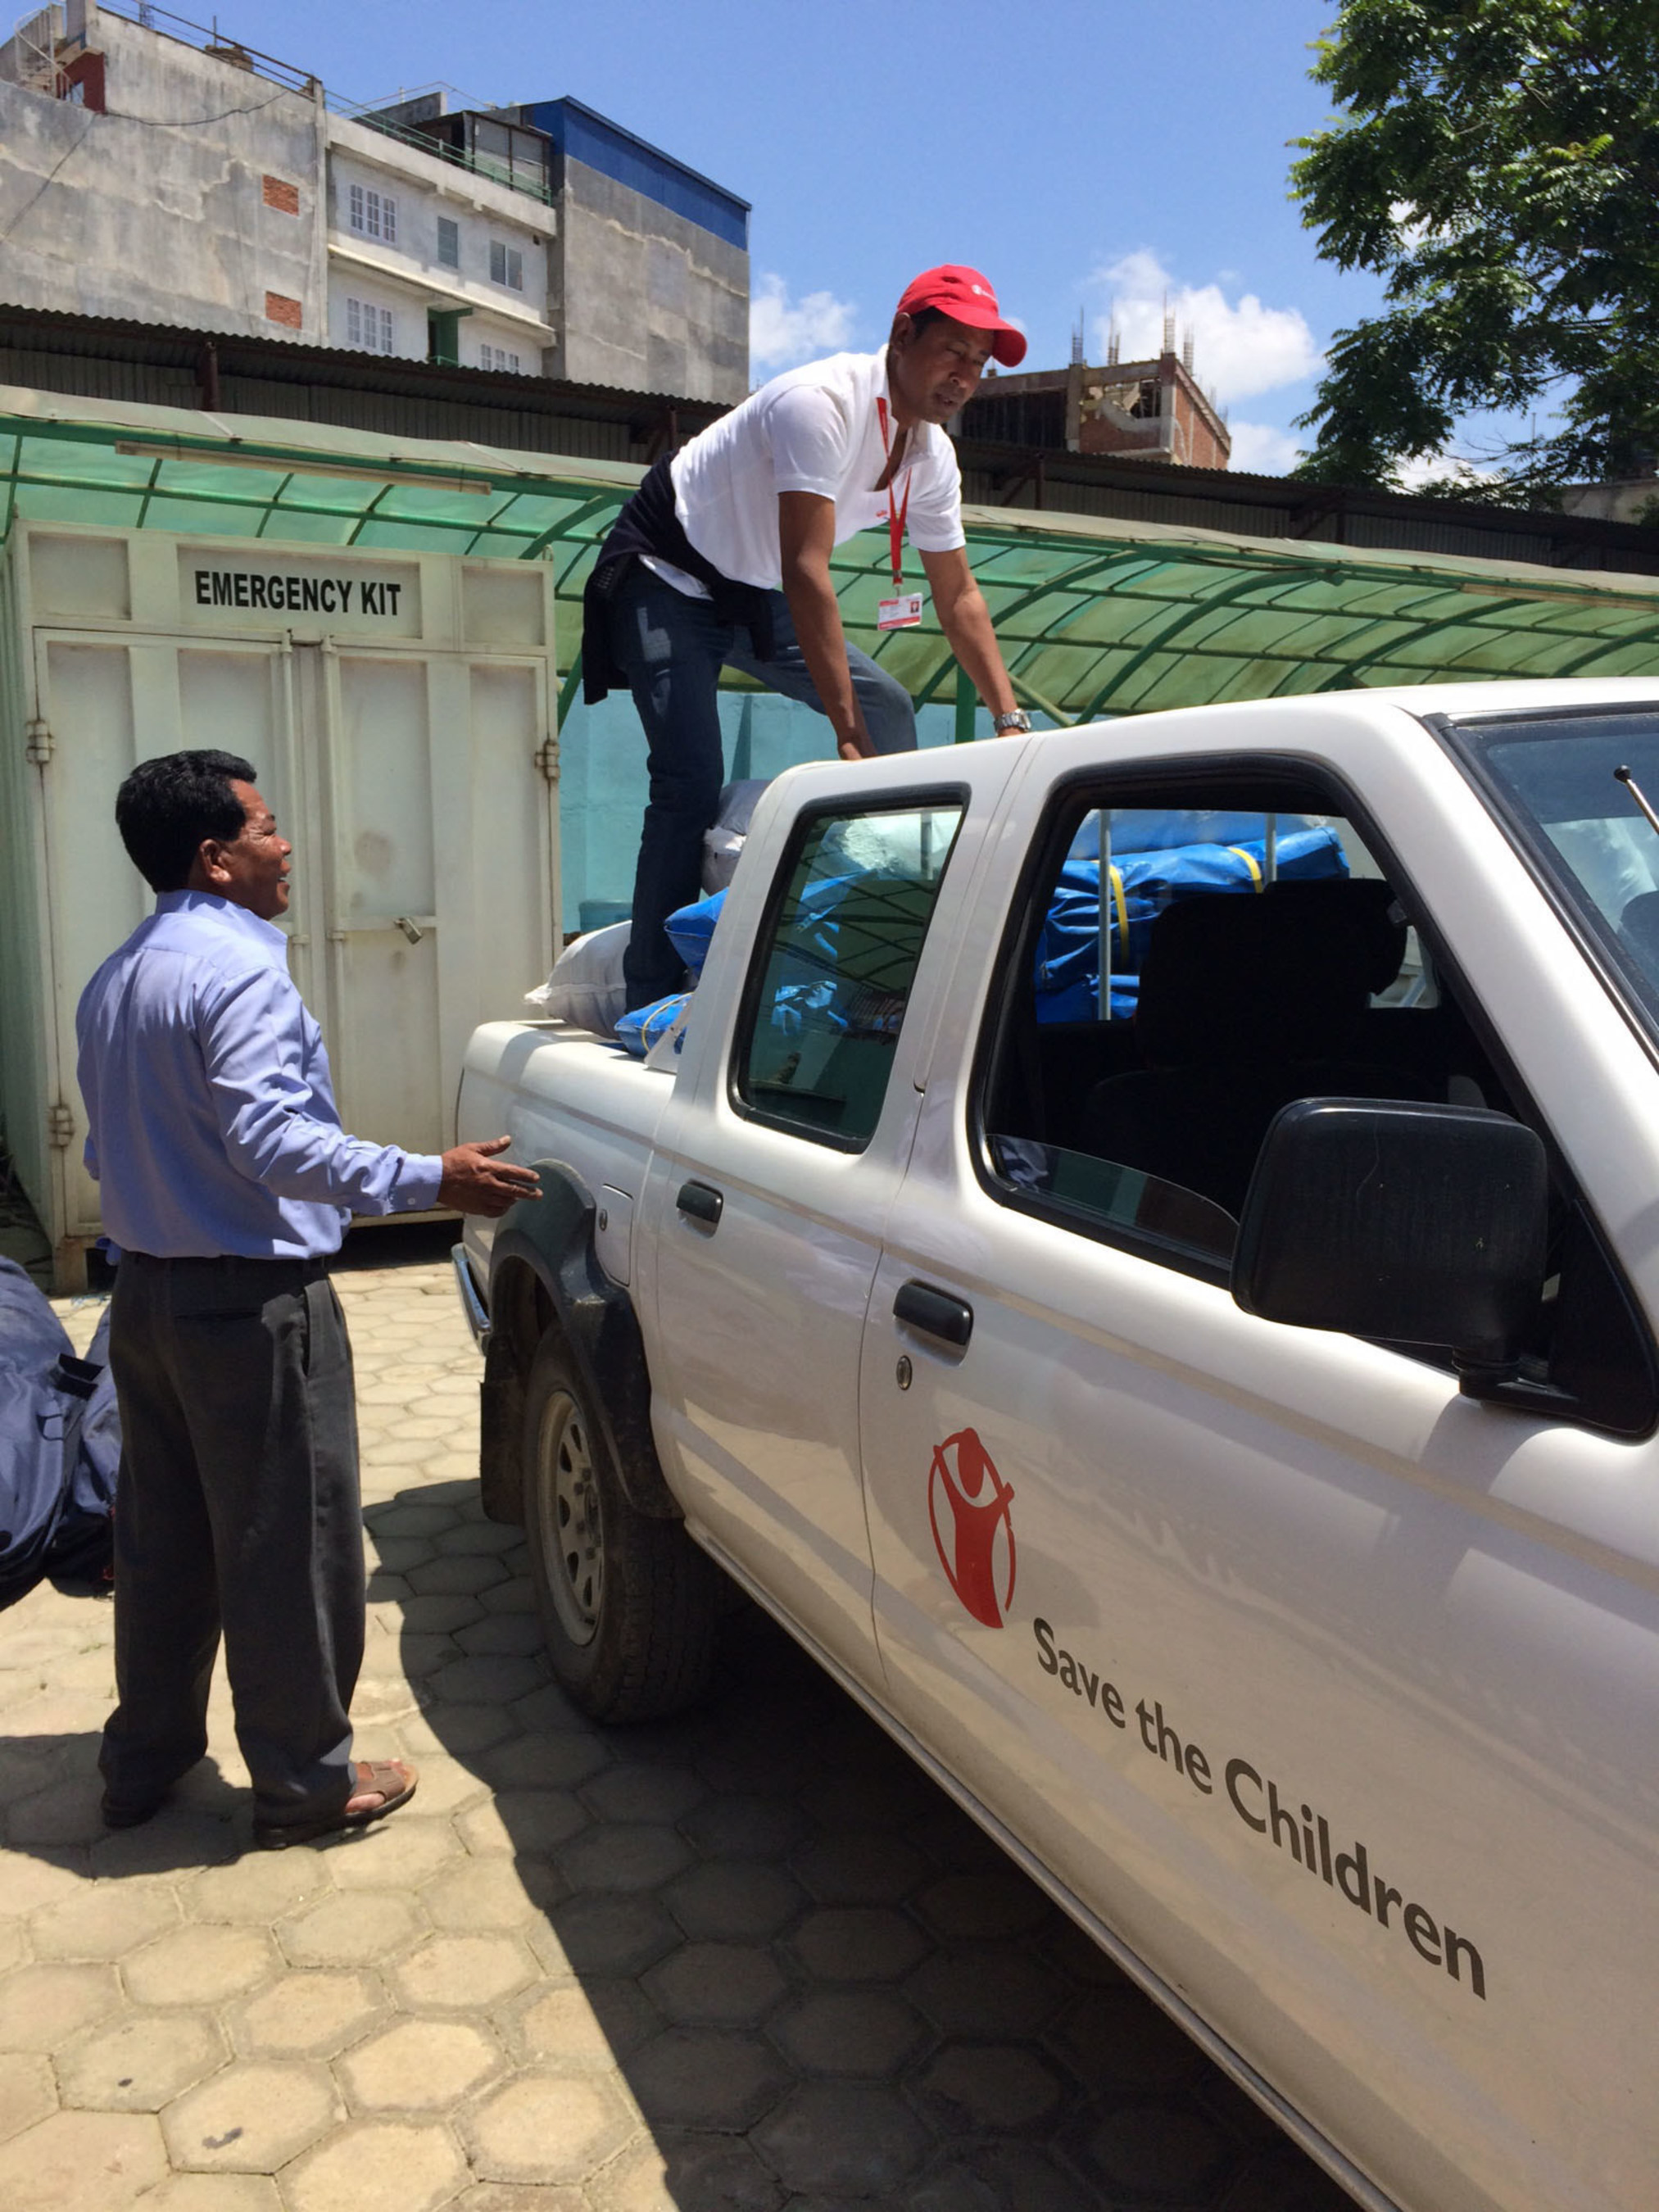 Save the Children staff unload emergency supplies for children and families left homeless by the earthquake in Nepal.